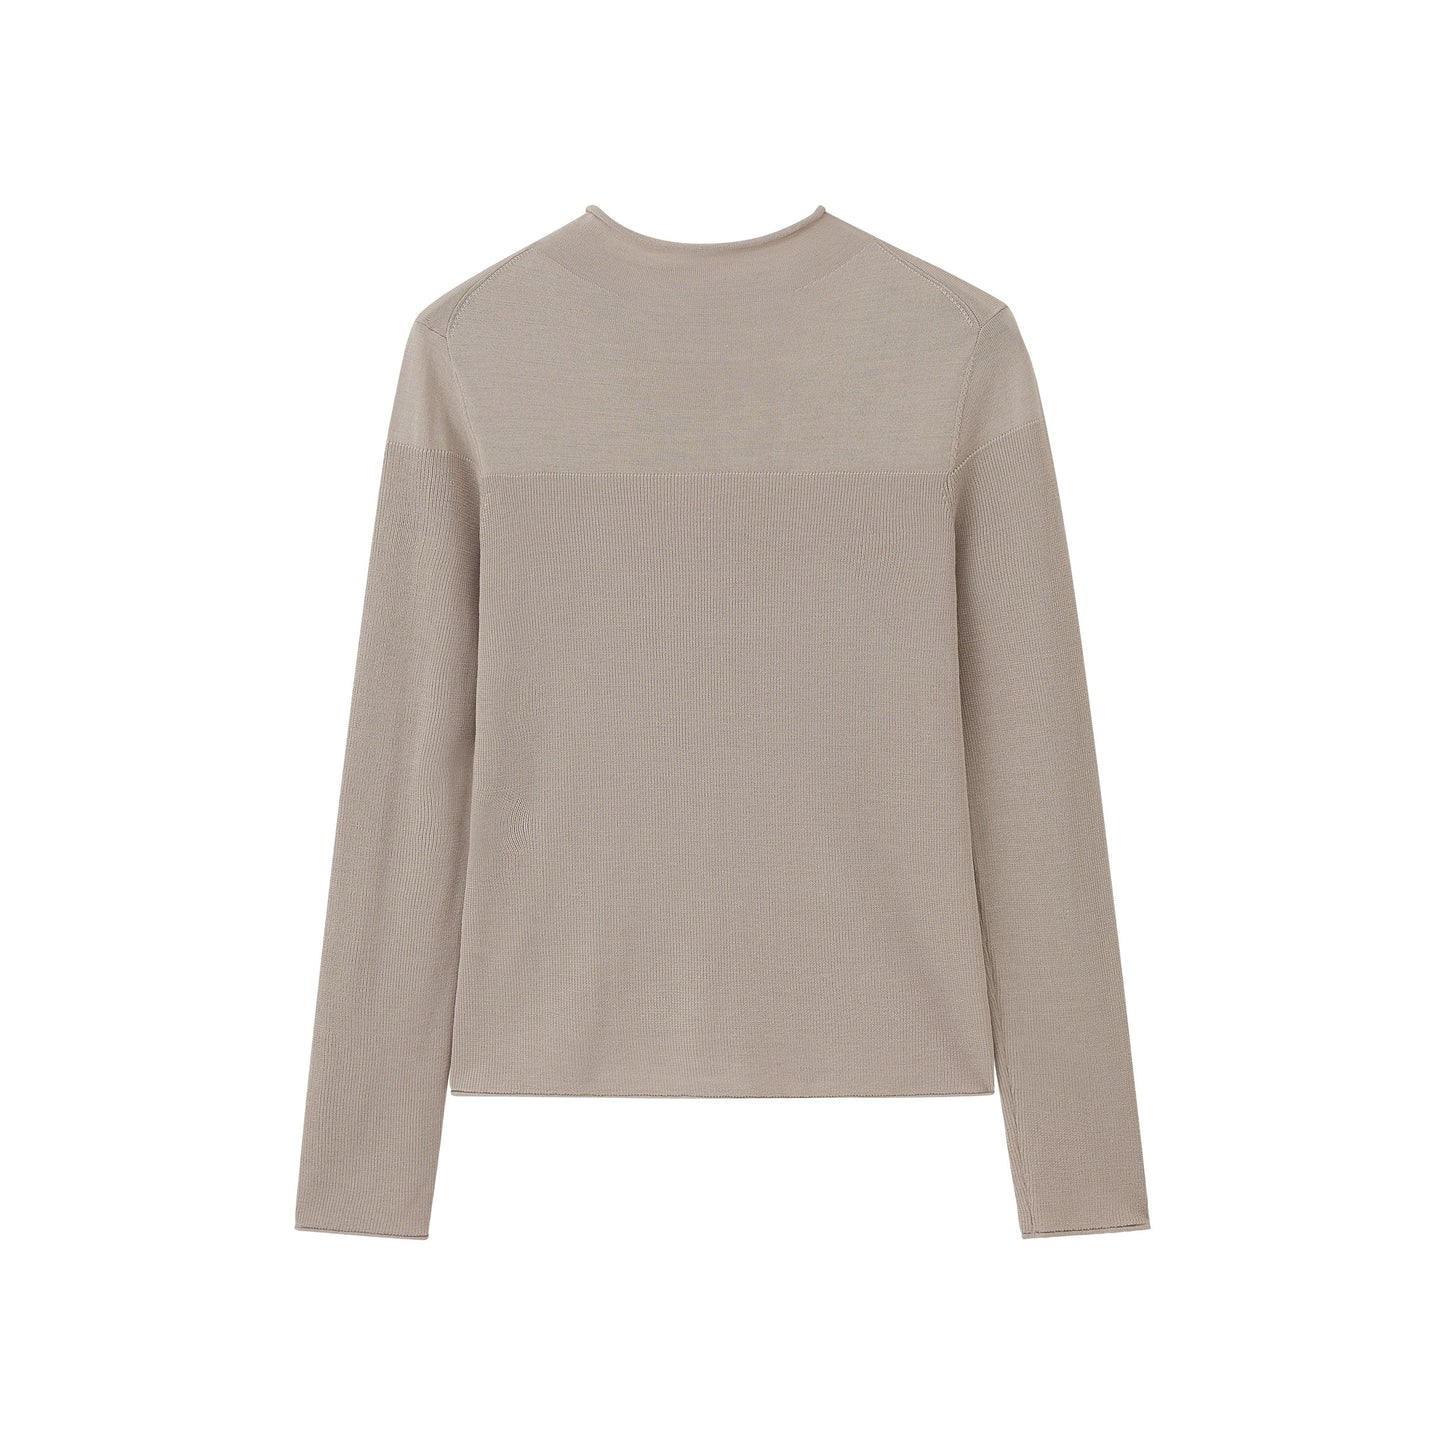 a grey silky wool mock neck sweater from back